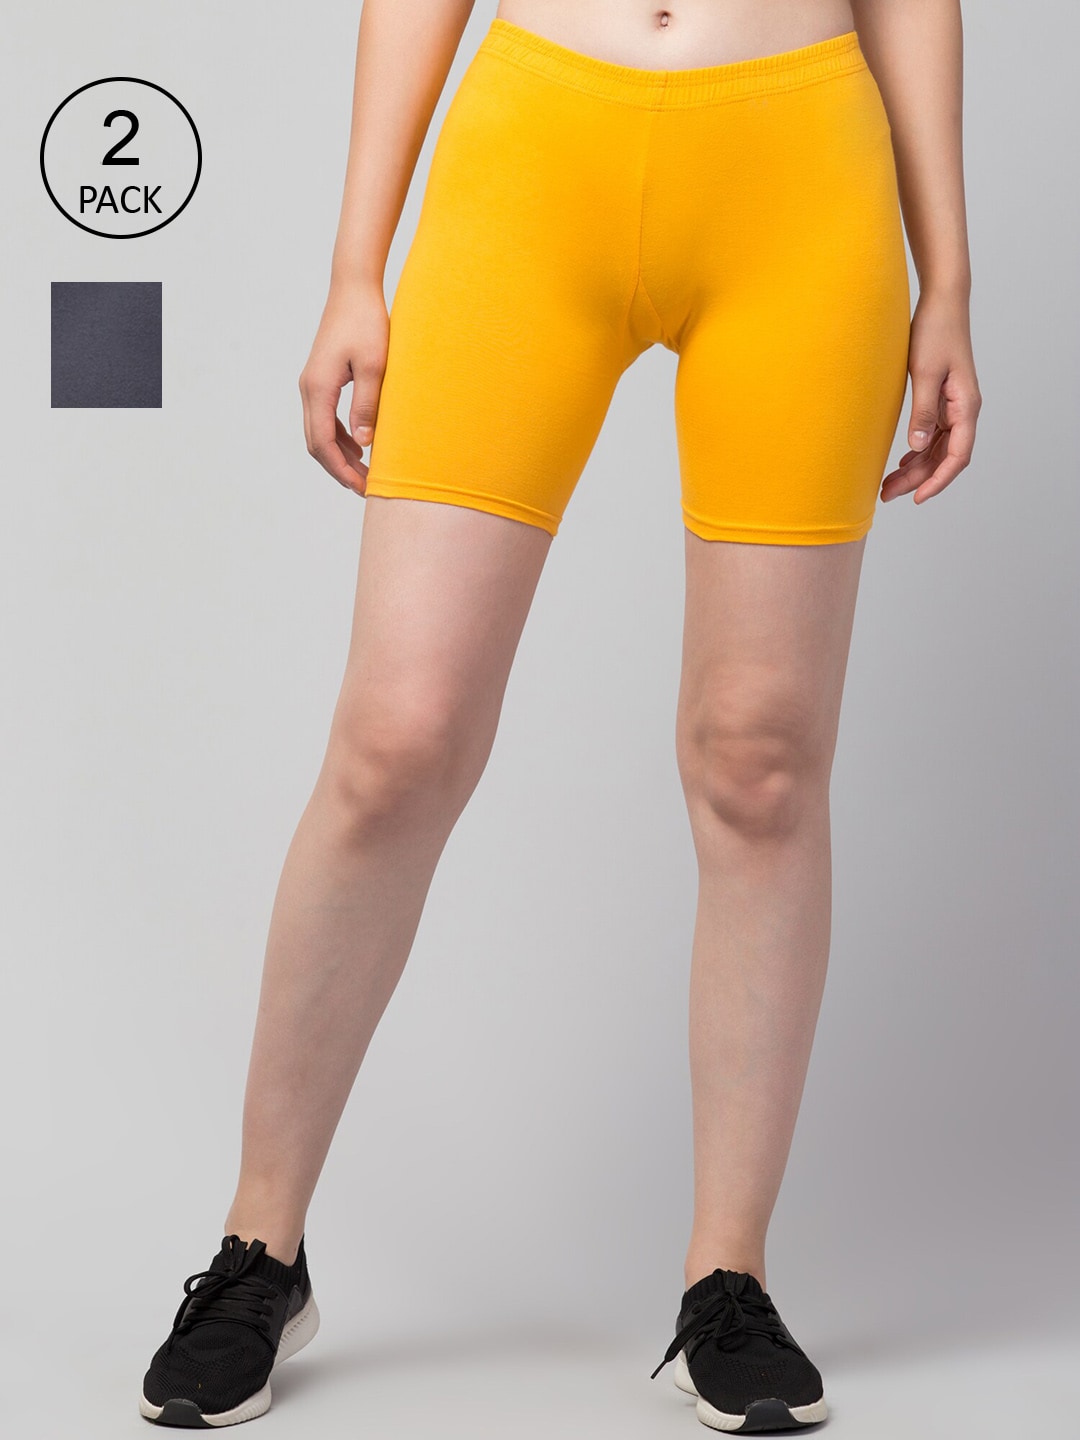 Apraa & Parma Women Set Of 2 Slim Fit Cycling Sports Shorts Price in India